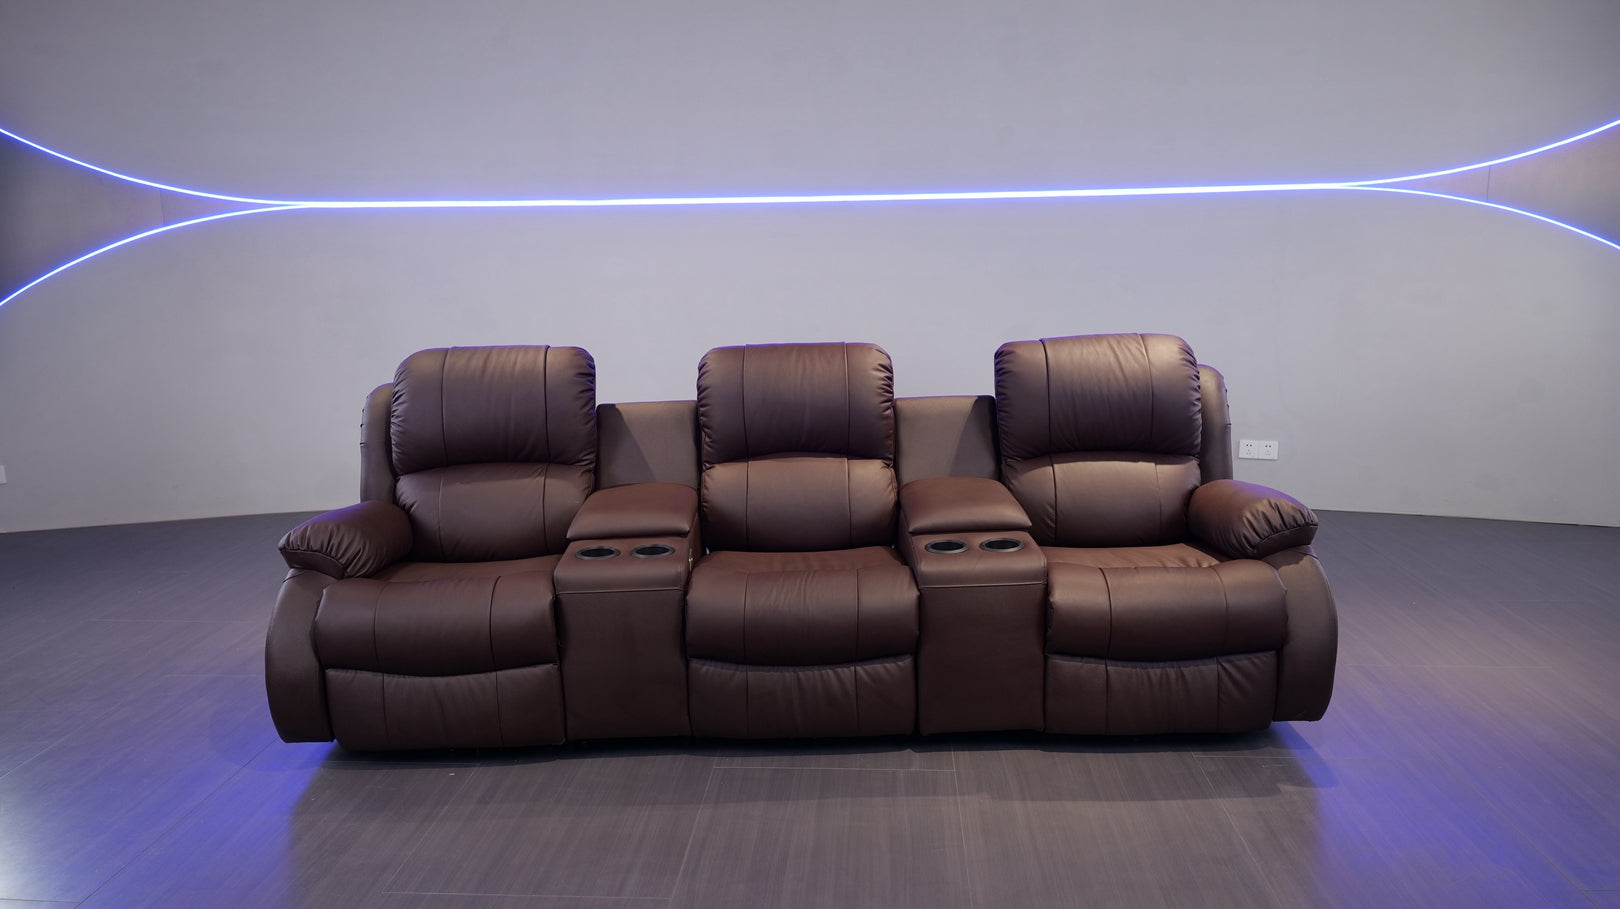 The Impact of Technological Innovations on Home Theater Sofa Design